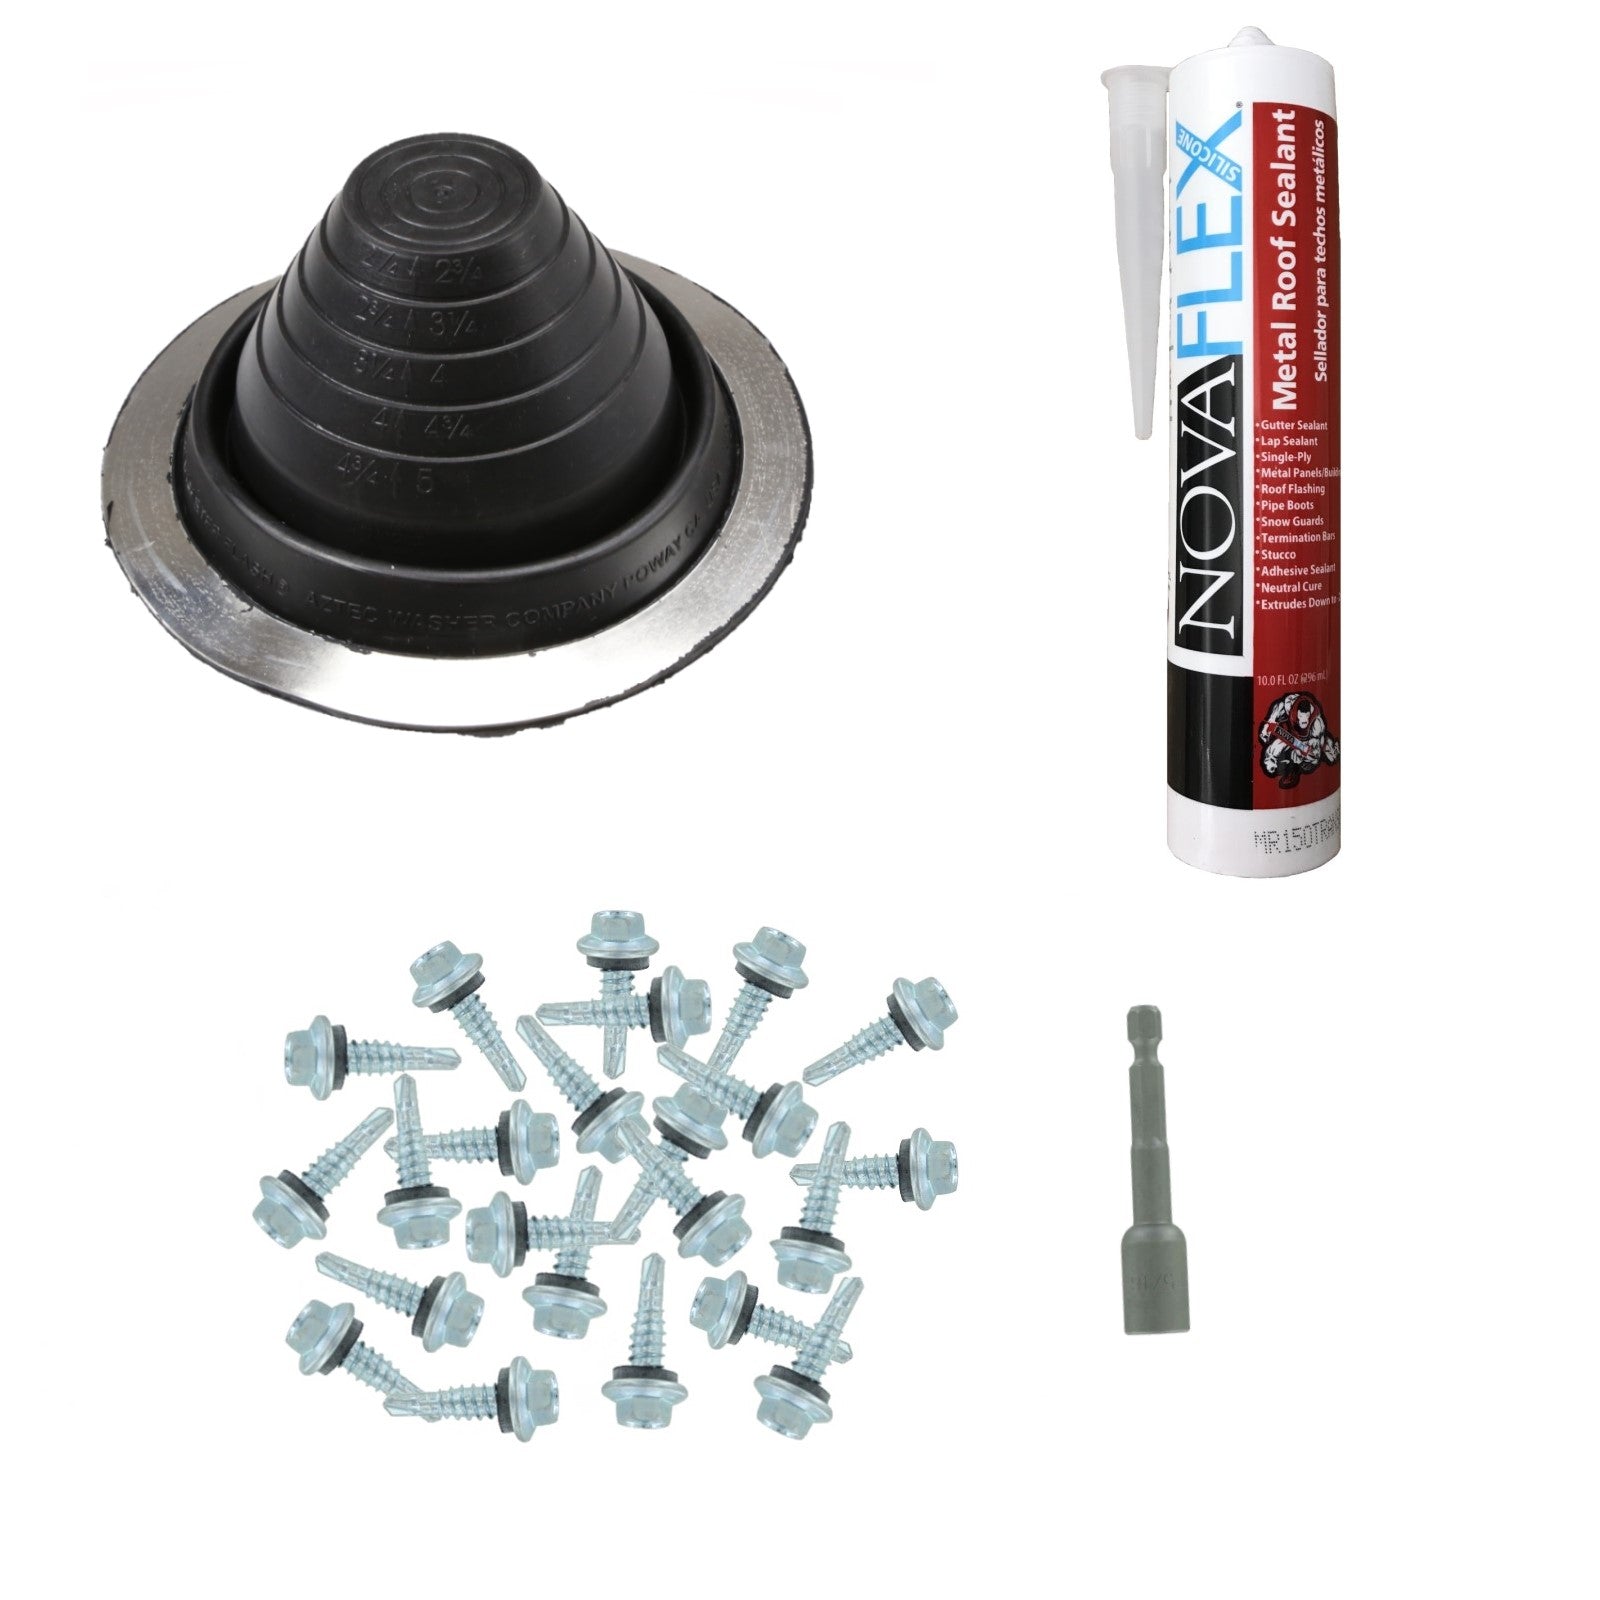 #3 Round EPDM Metal Roof Pipe Boot wInstall Kit Black